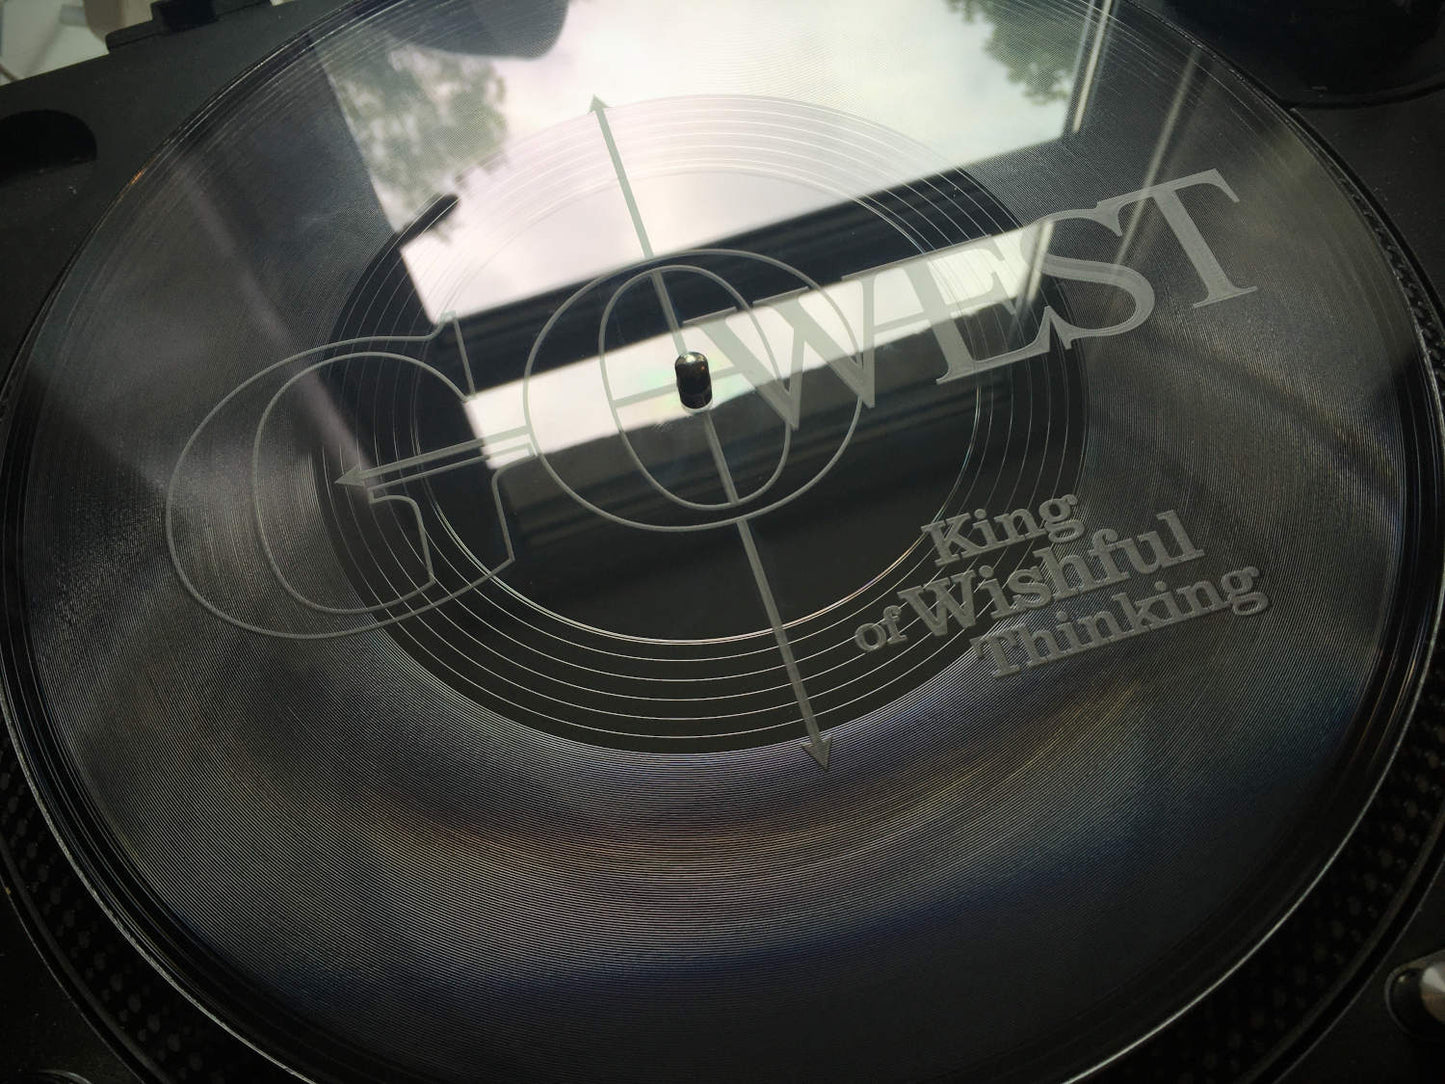 EXCLUSIVE! GO WEST: King of Wishful Thinking - Lathe Cut 12-inch clear vinyl signed by Peter Cox and Richard Drummie - 50 for the world!